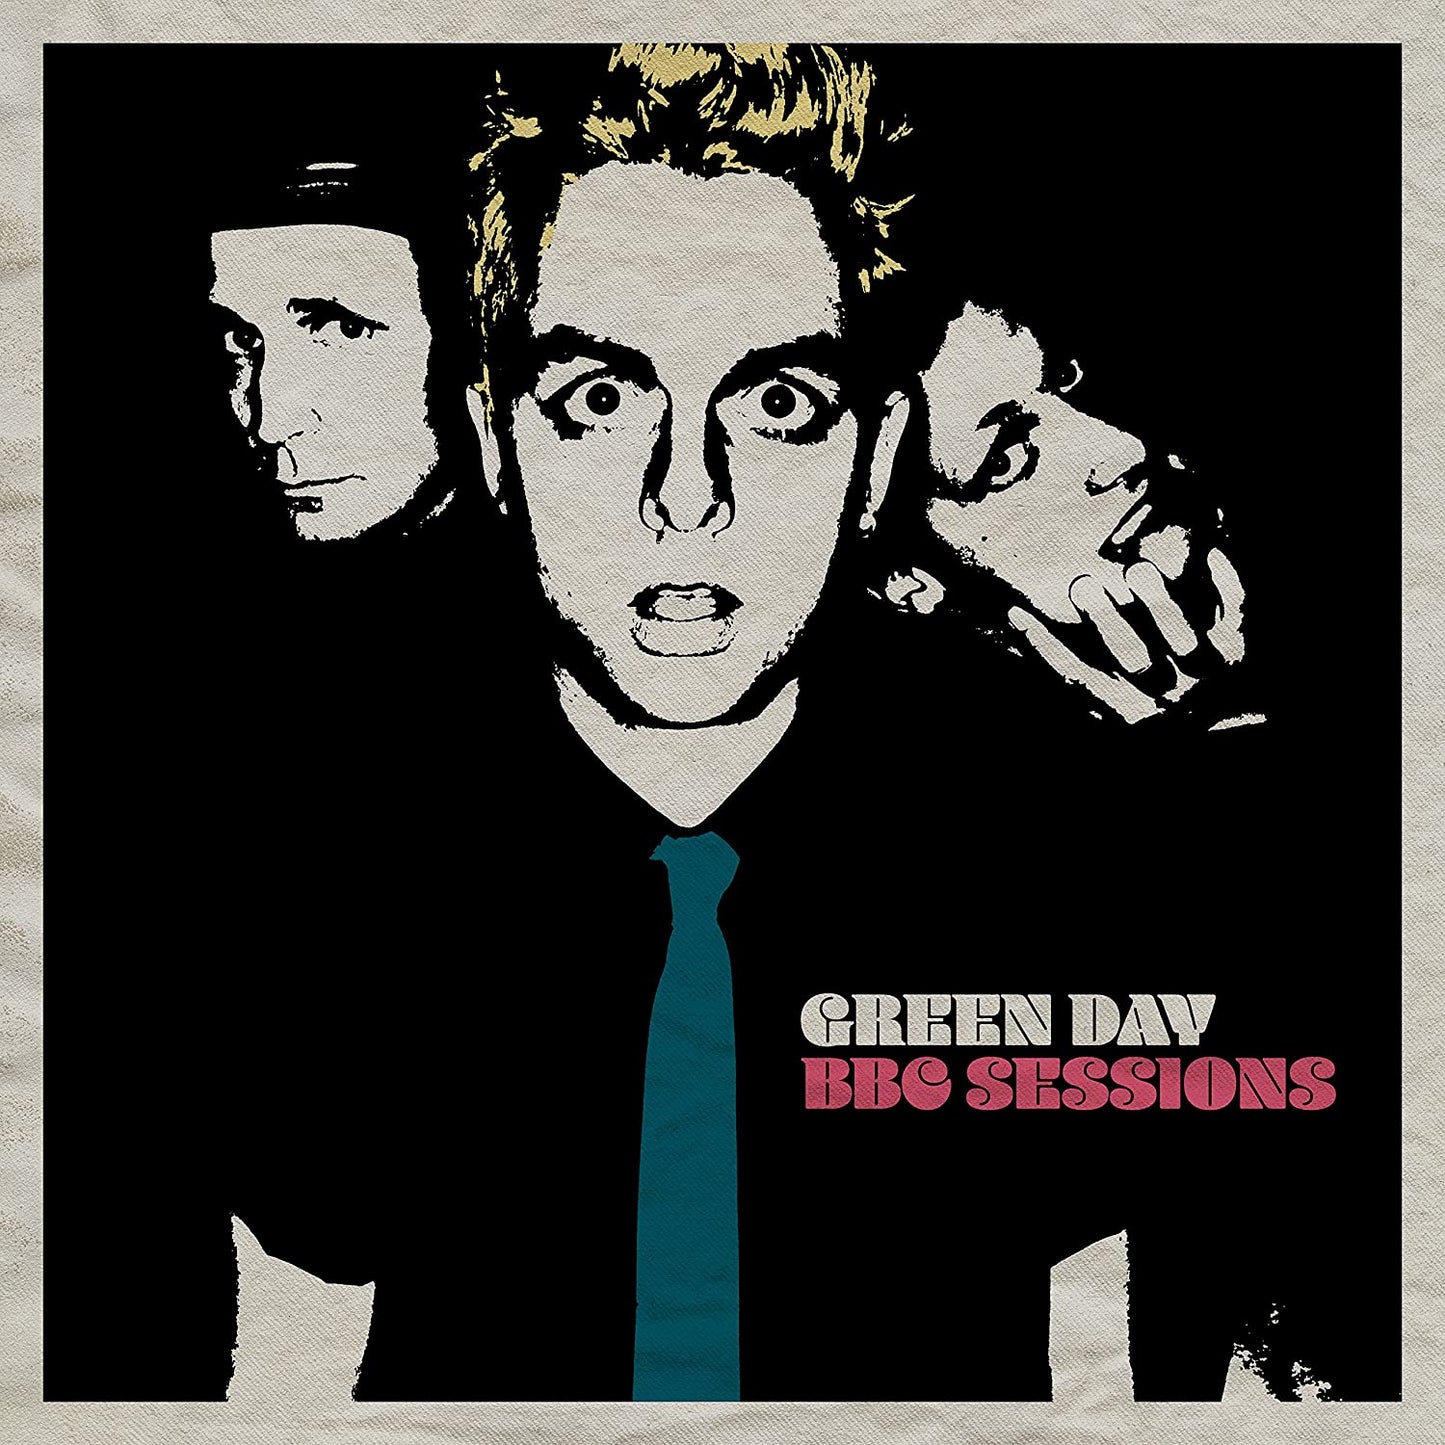 Green Day - BBC Sessions - 2CD